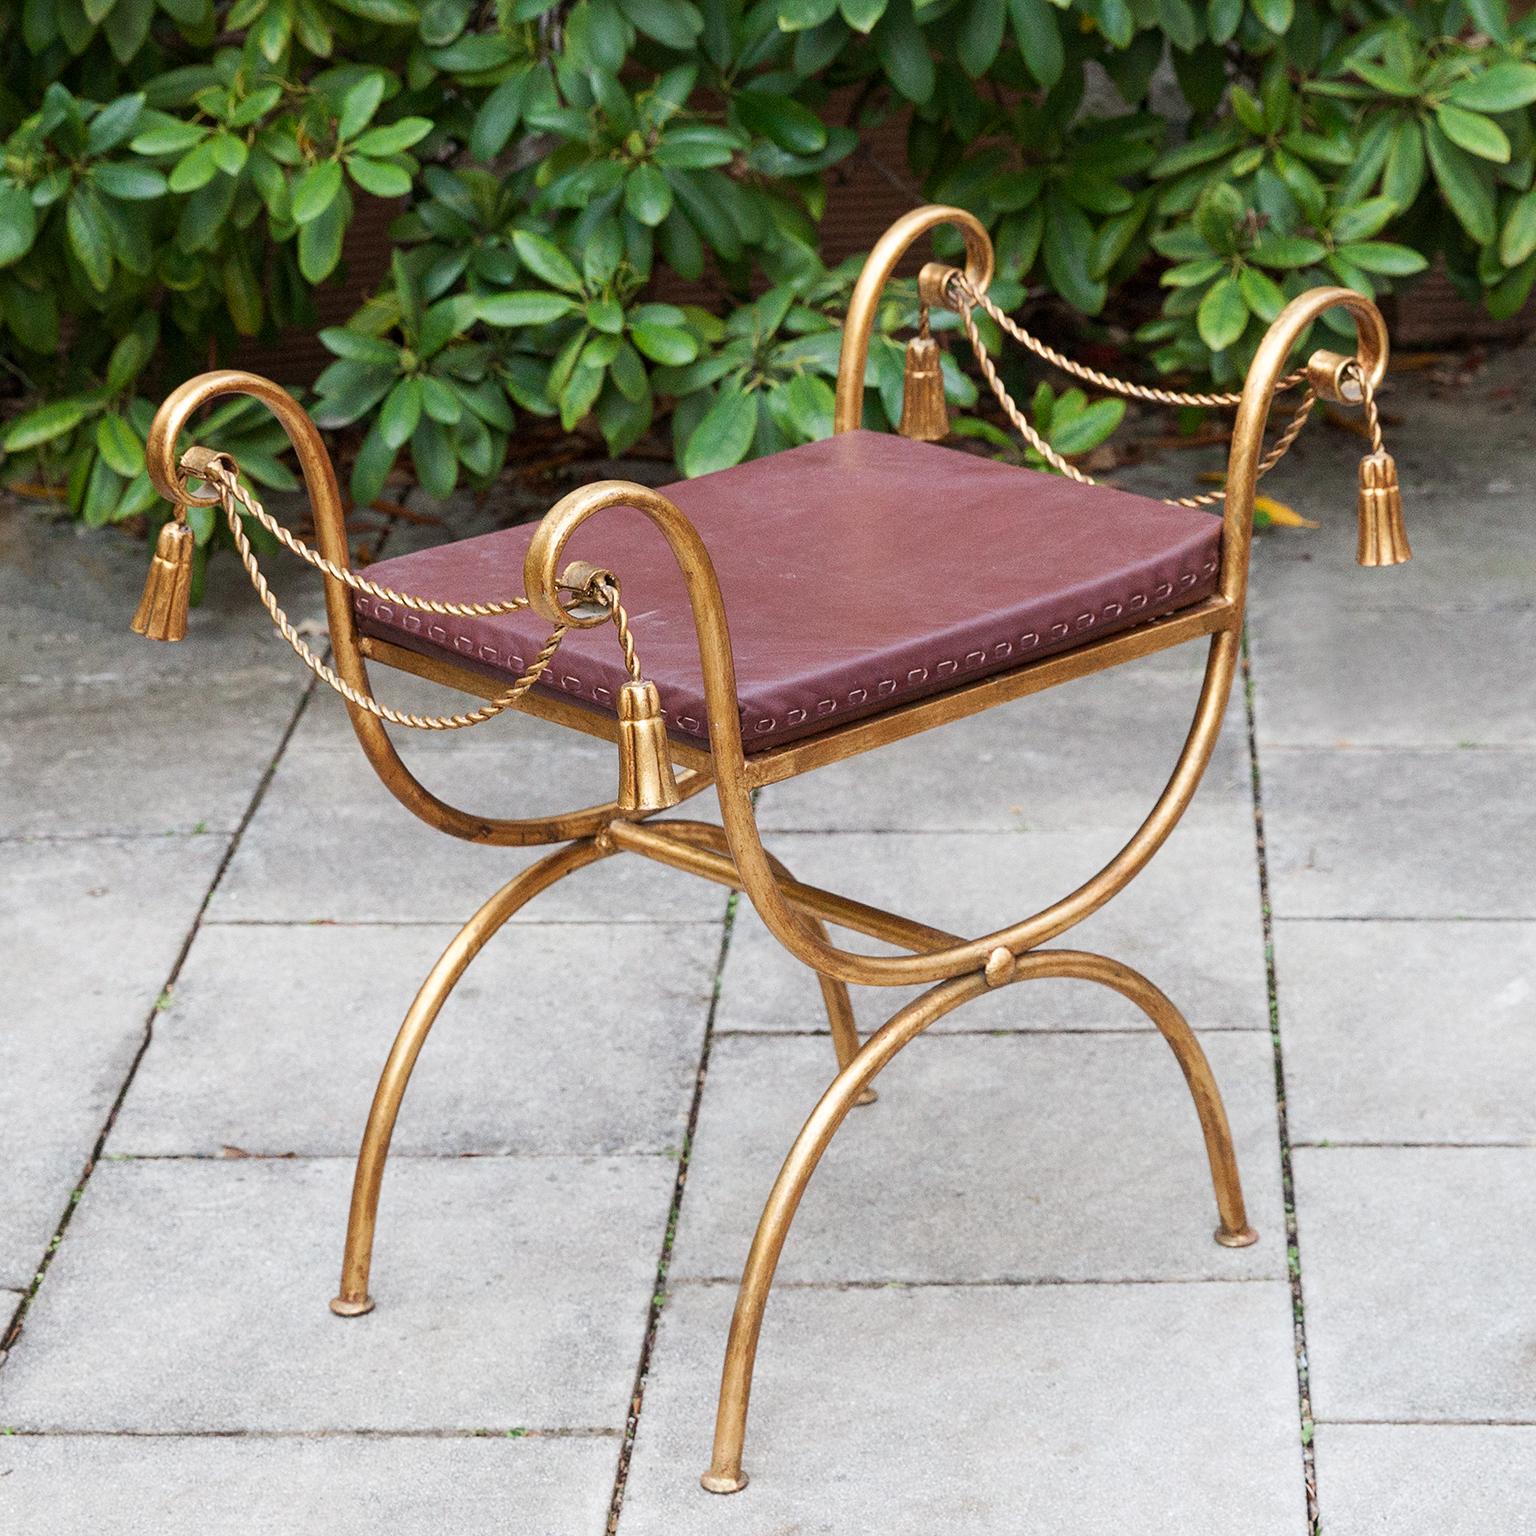 Very well-made and elegant classic Italian tassel chair with gilt painted metal frame made in the form of twisted rope and tassel applications, includes a brown leather seating pad. Made in Italy 1950s

Measures: 64 H x 65 W x 25 D cm SH 48cm.